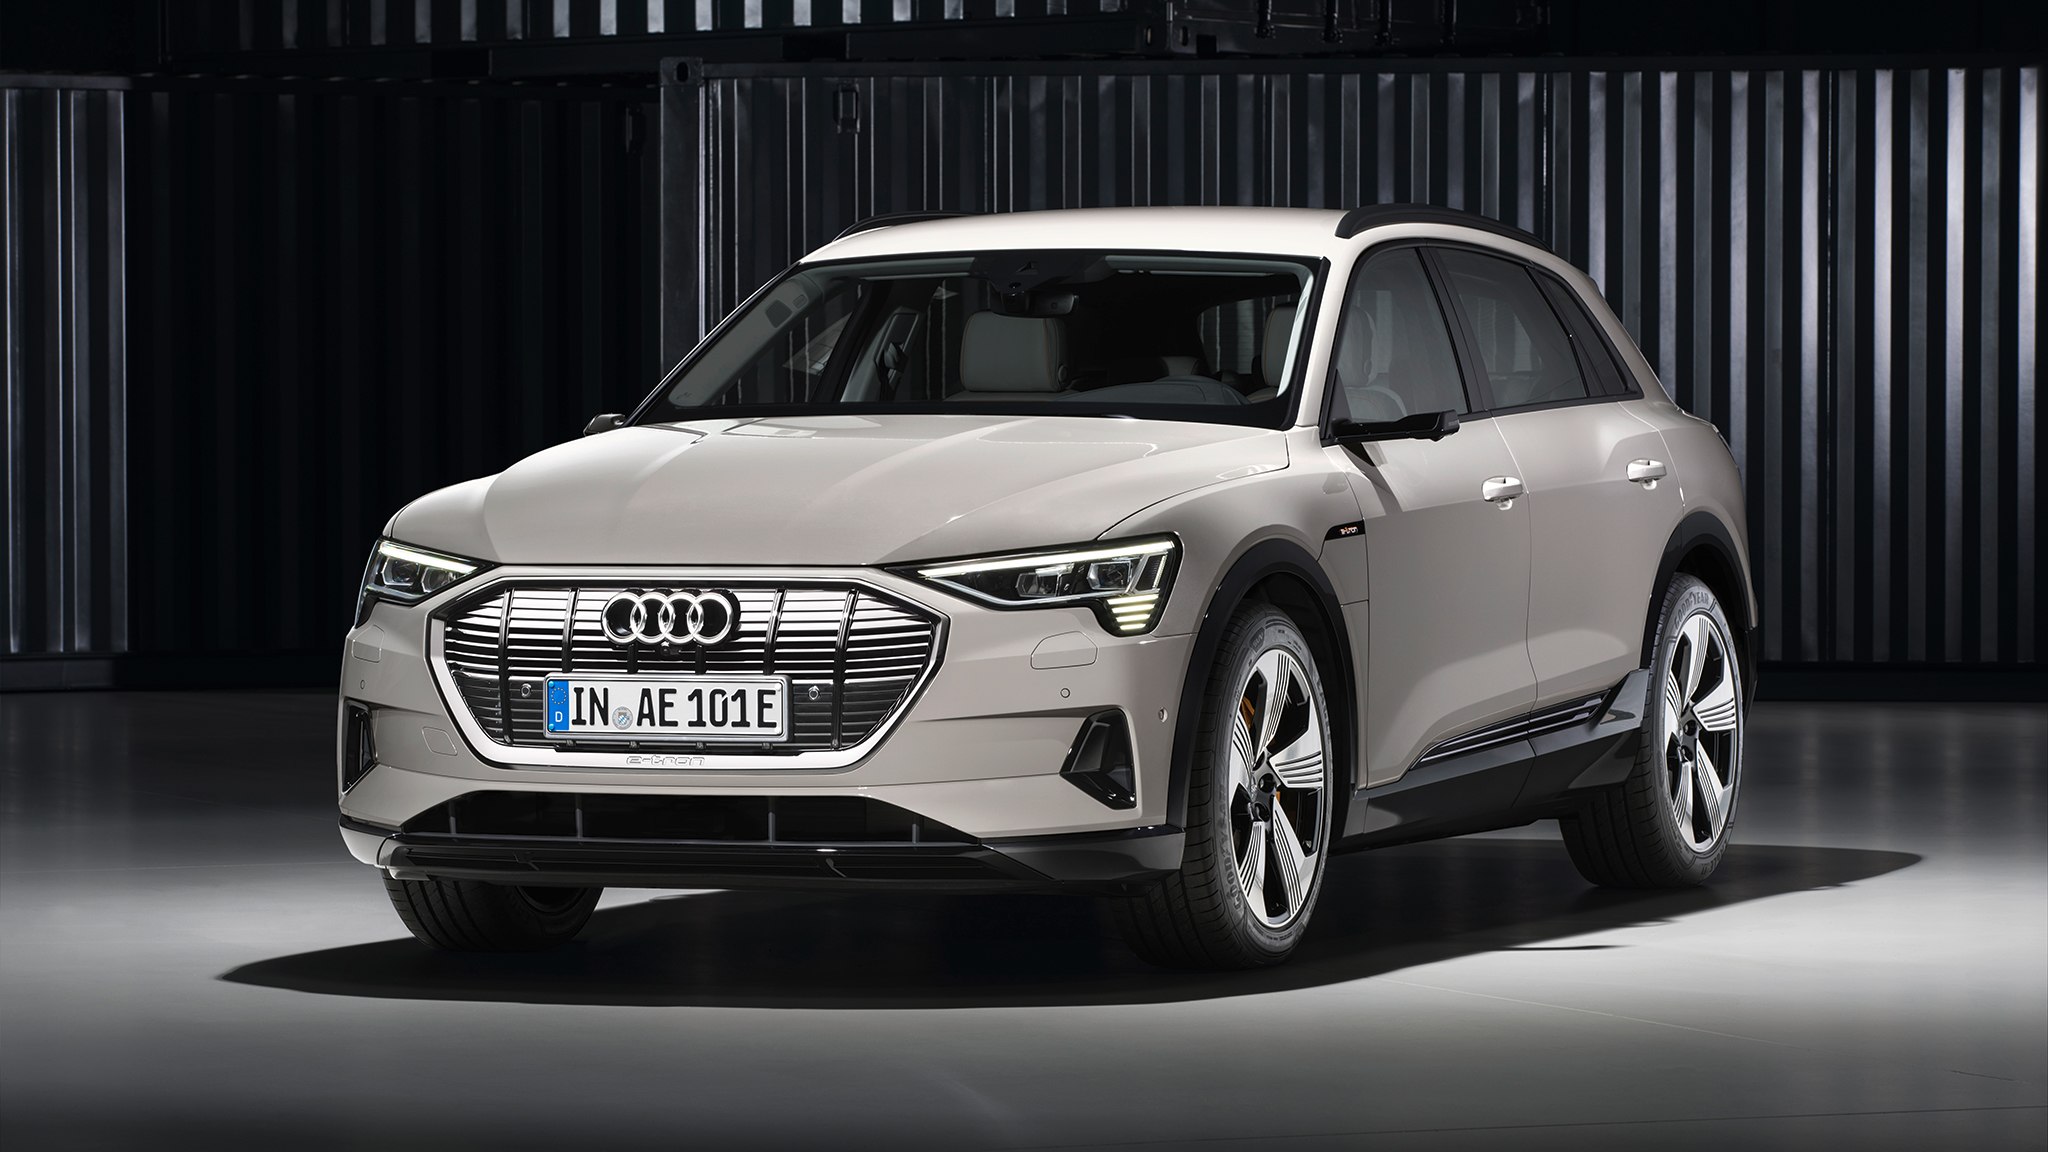 2019 Audi E-Tron All-Electric SUV Officially Revealed